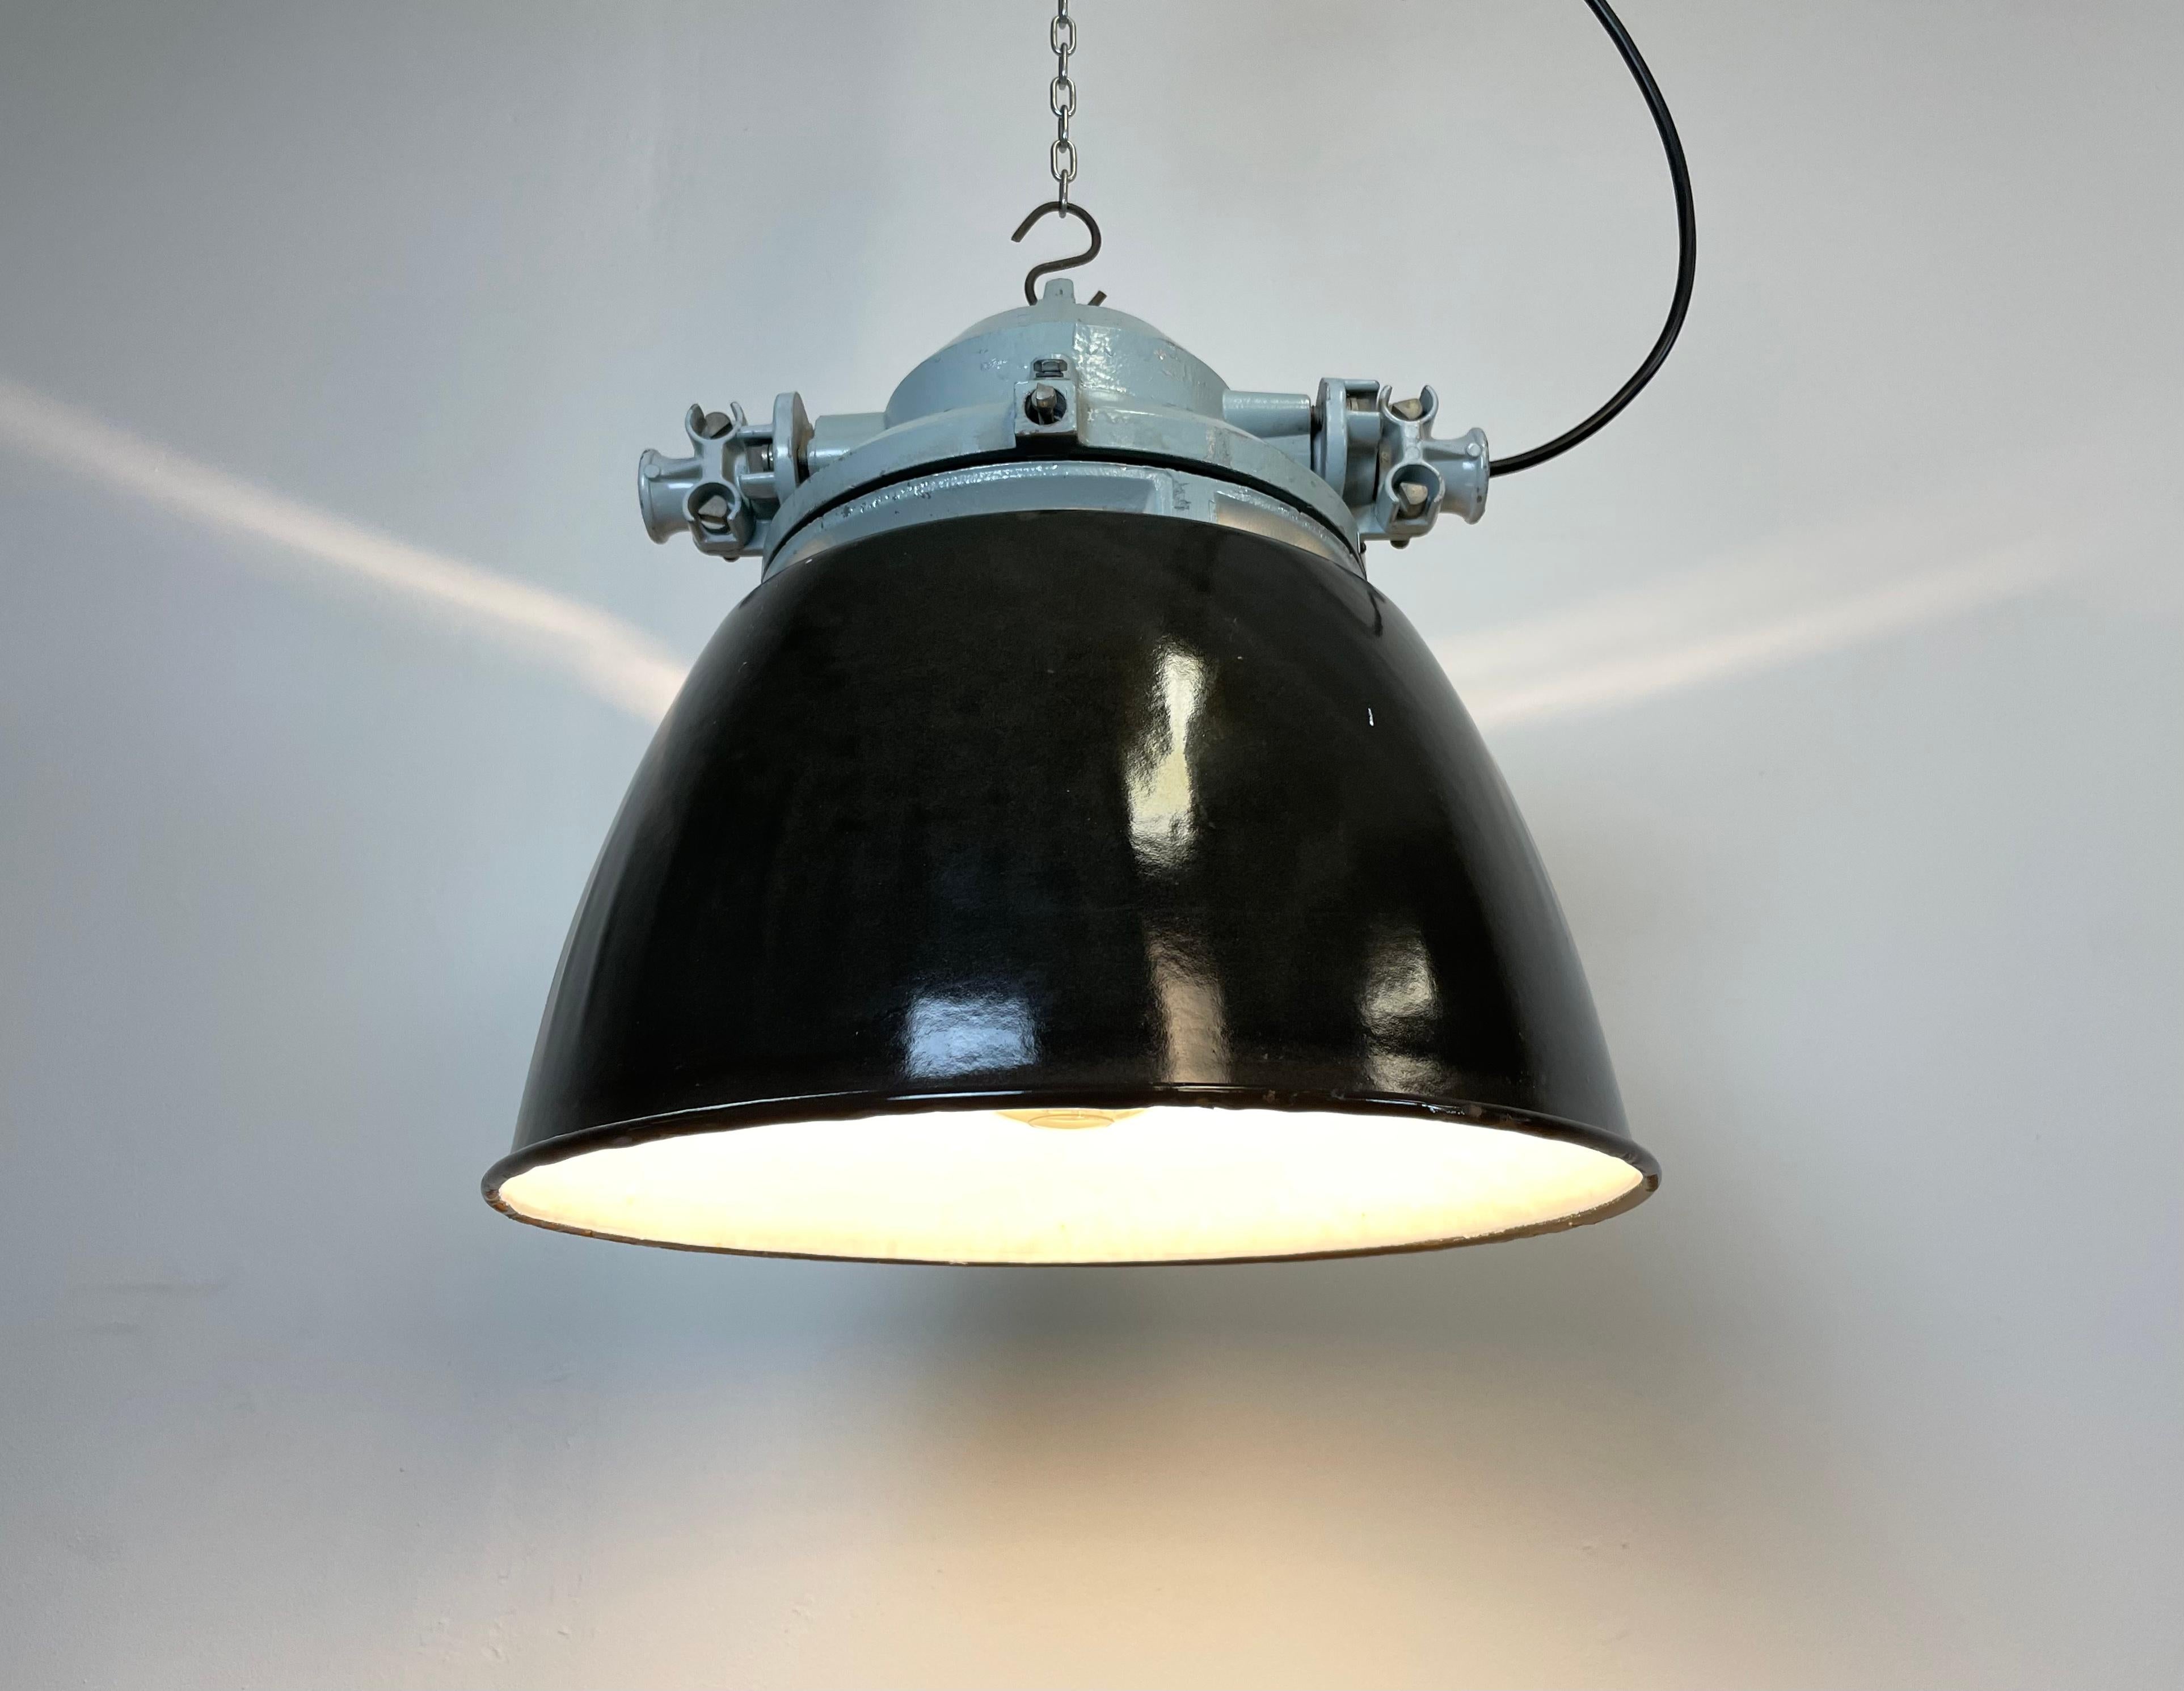 Grey Explosion Proof Lamp with Black Enameled Shade, 1970s For Sale 3